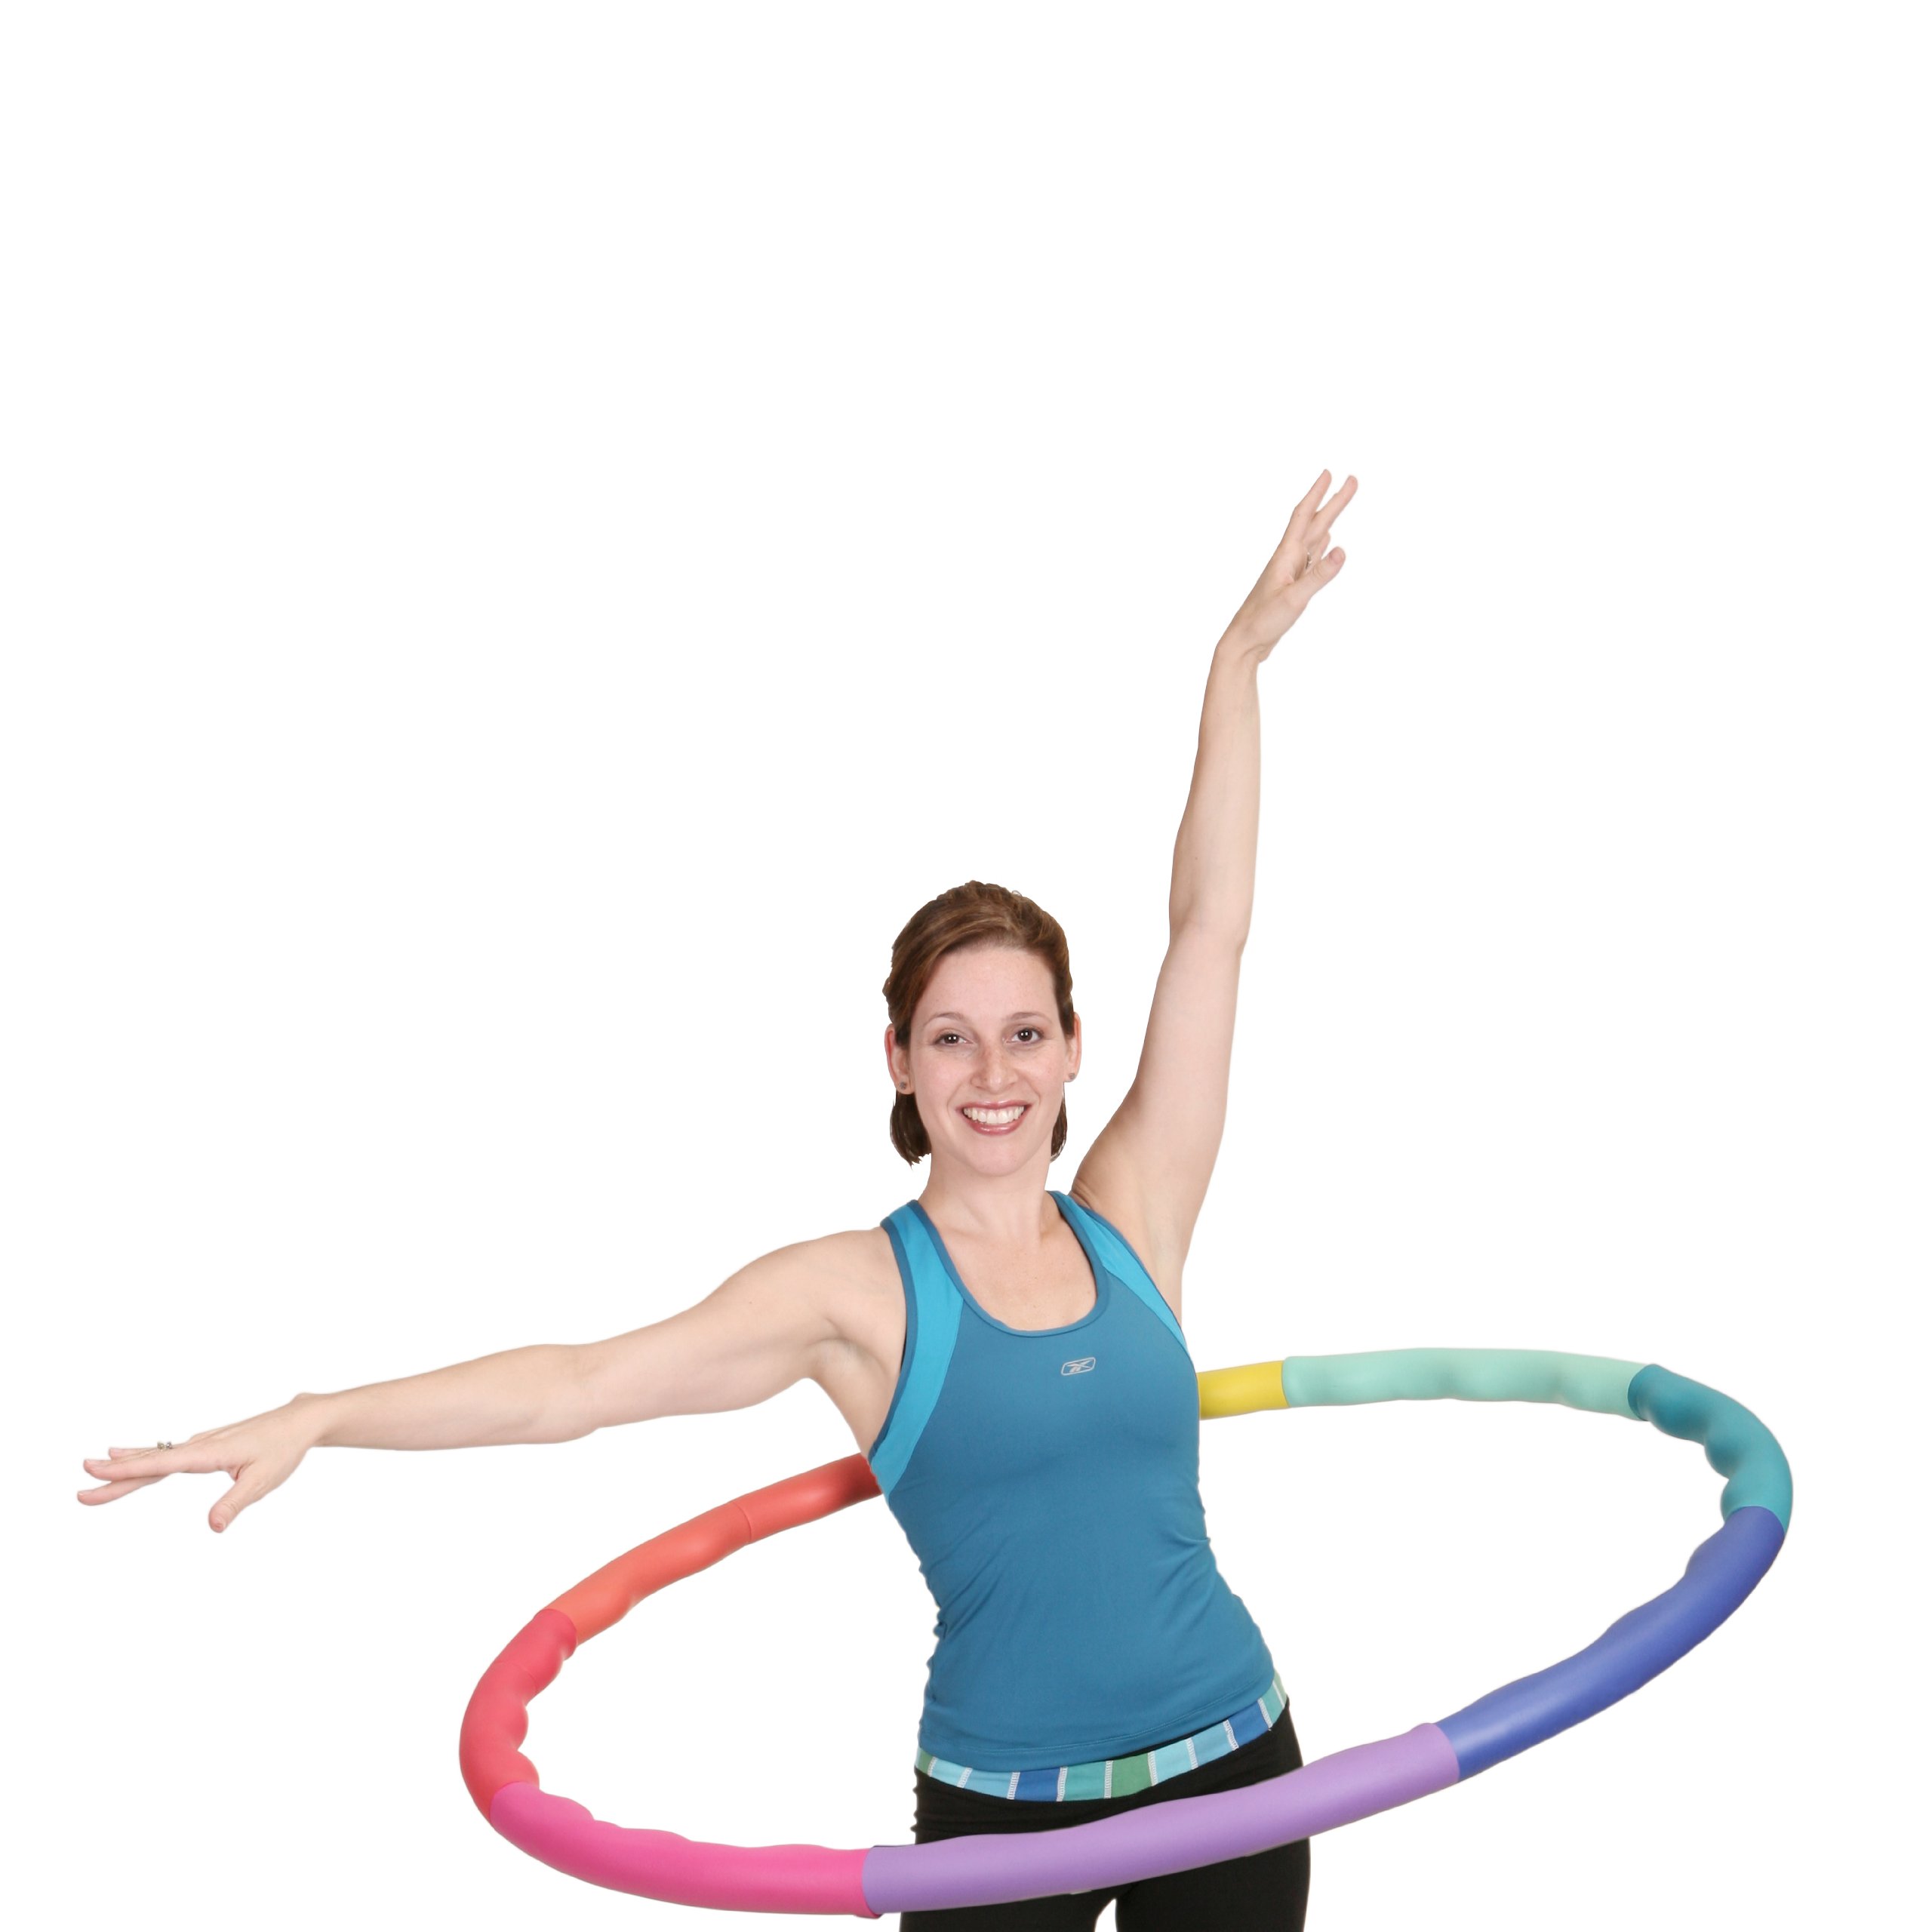 Sports Hoop Weighted Hula Hoop, ACU Hoop 3M - 3.2lb Medium, Weight Loss Fitness Exercise with Wavy Ridges (Rainbow Colors)